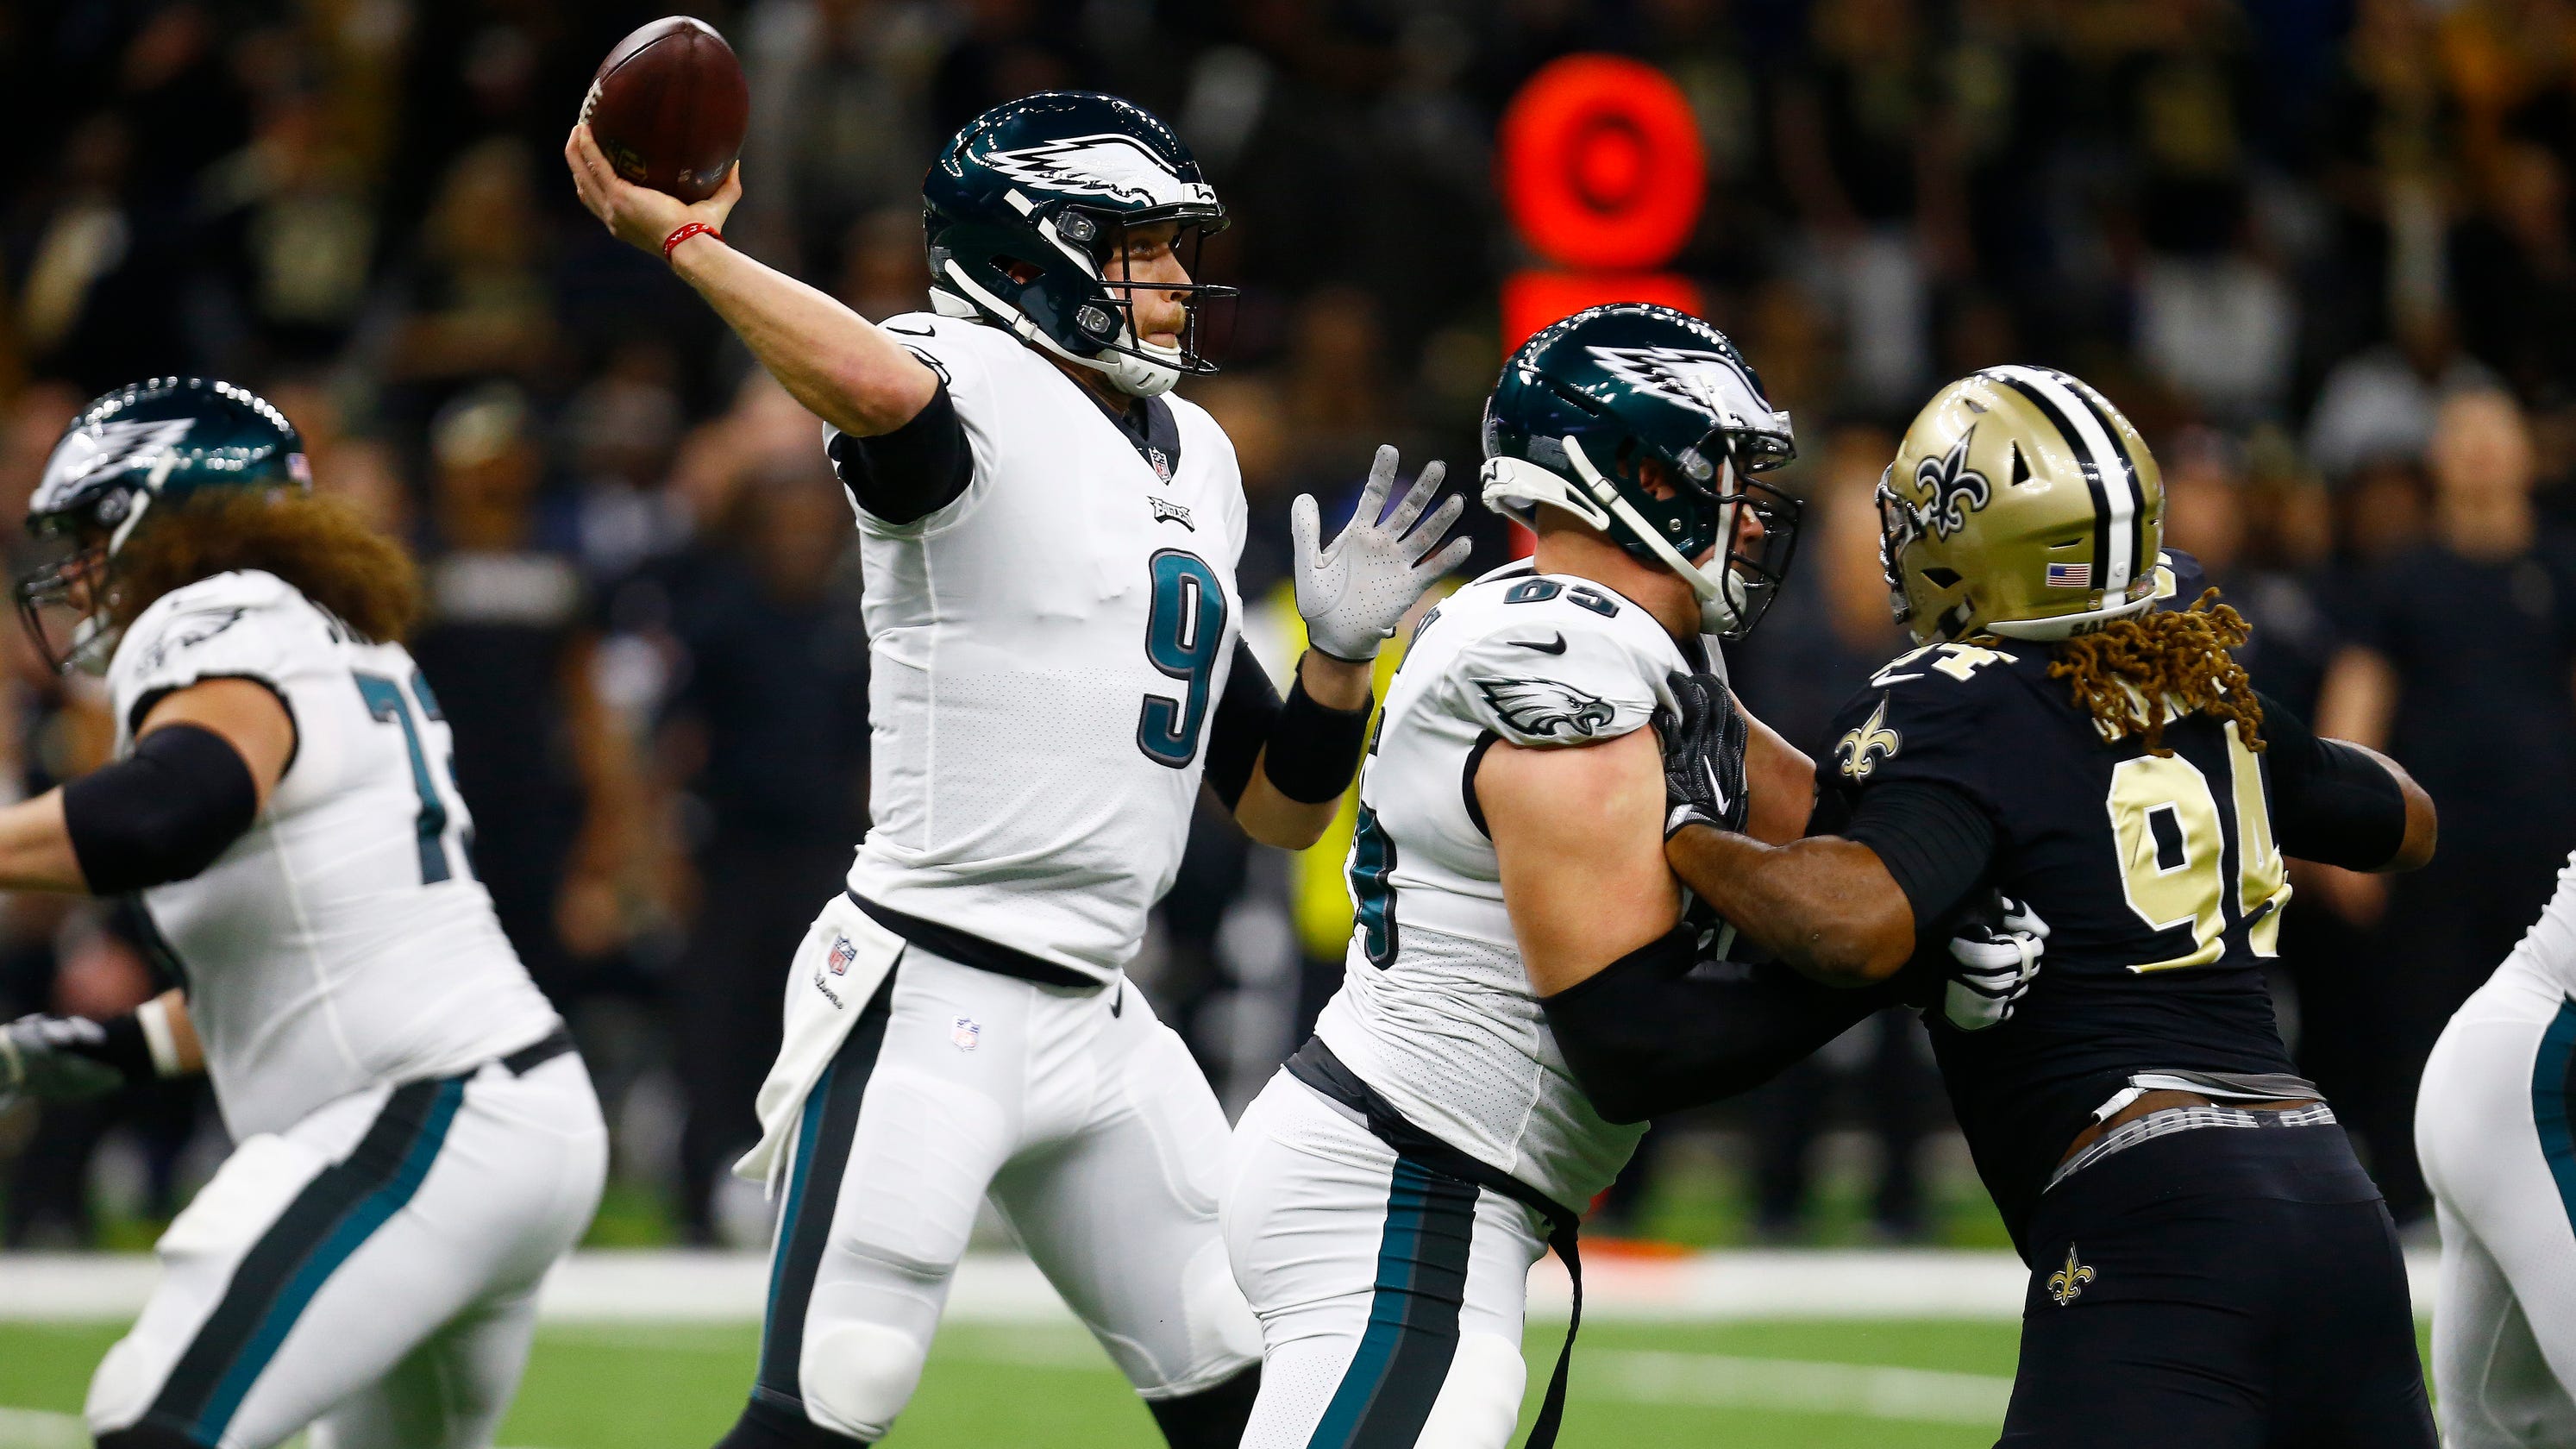 Foles' magic runs out, and questions about his future with the Eagles begin2987 x 1680